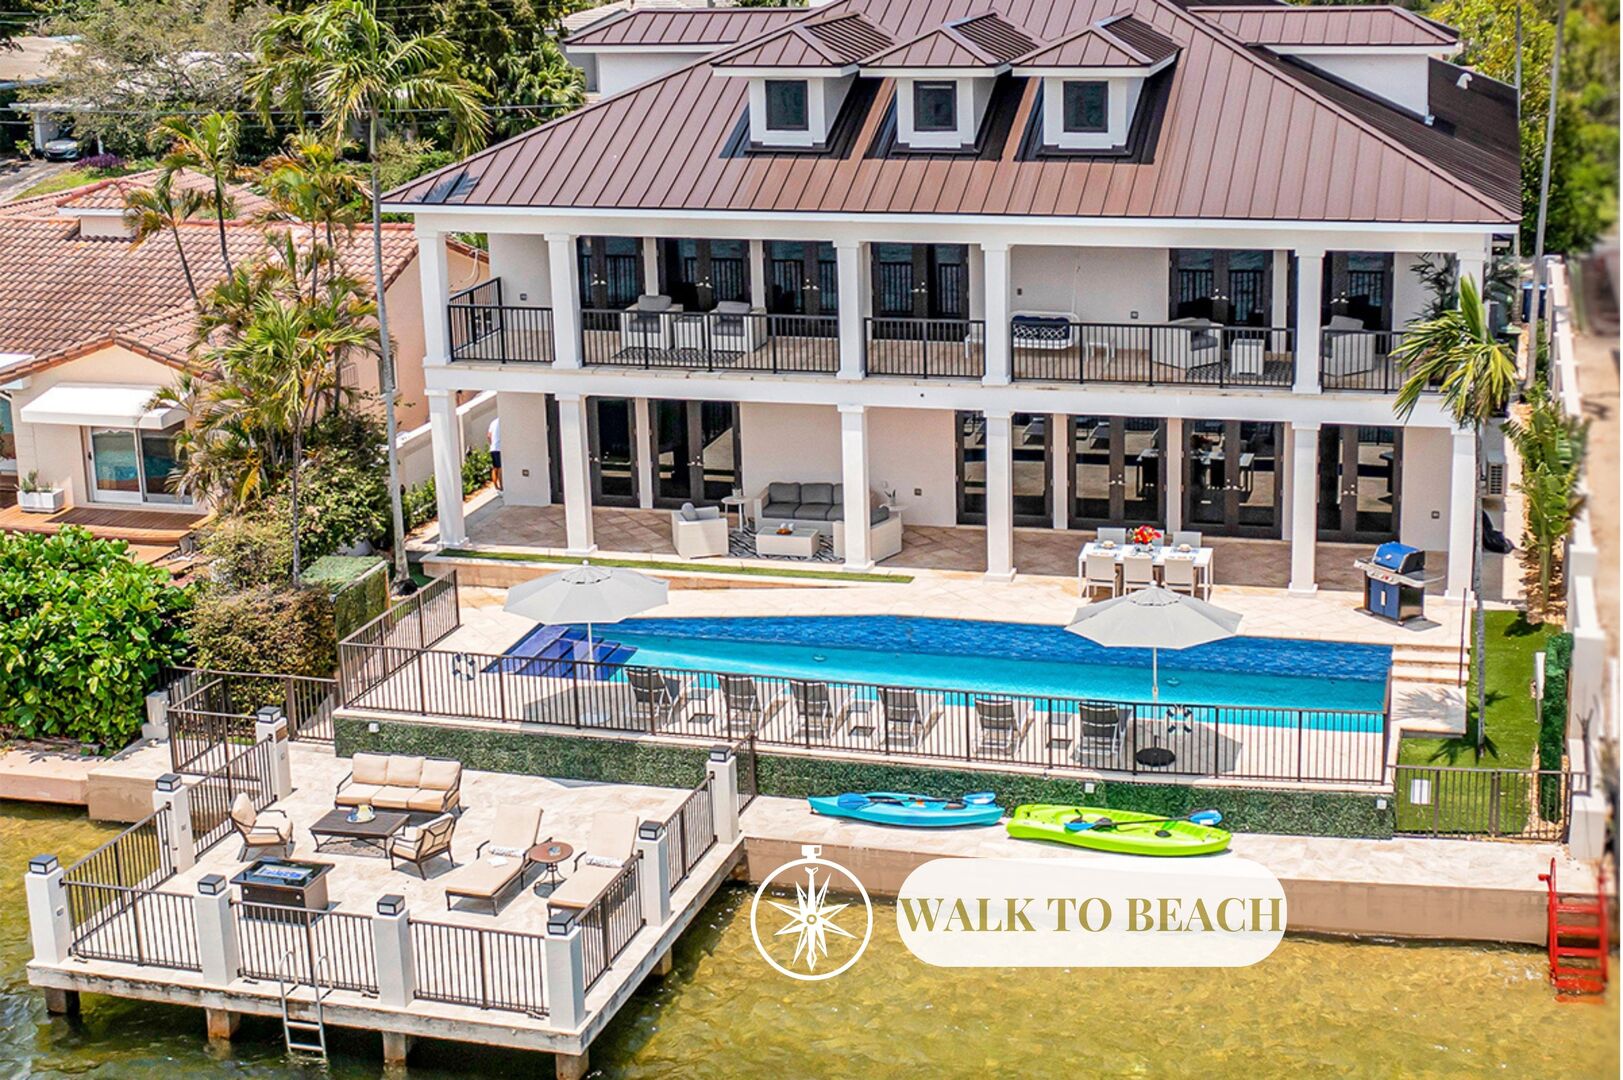 Modern Coastal villa par-excellence. Observe as the yachting capital of the world reveals itself from this three-story villa on the edge of Harbor Inlet overlooking the Port Everglades waterway.